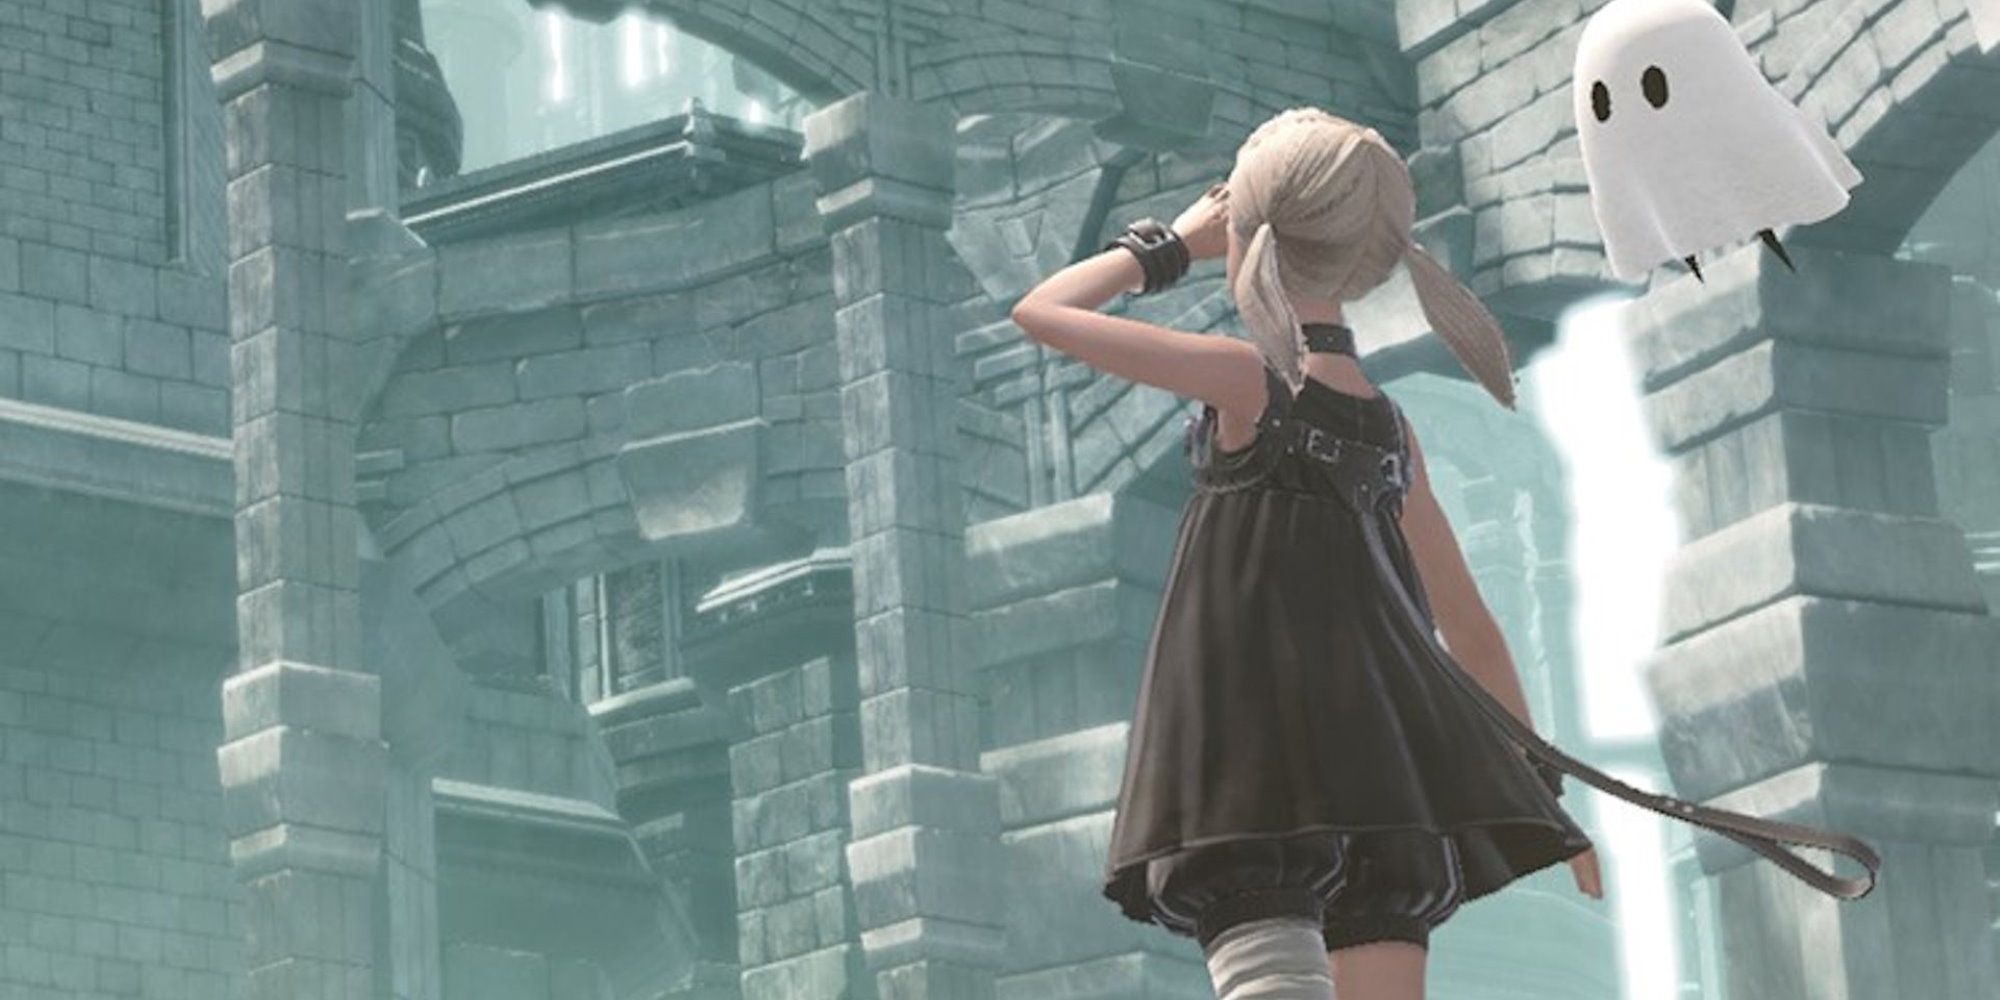 NieR Re[in]carnation – Now Available in Japan